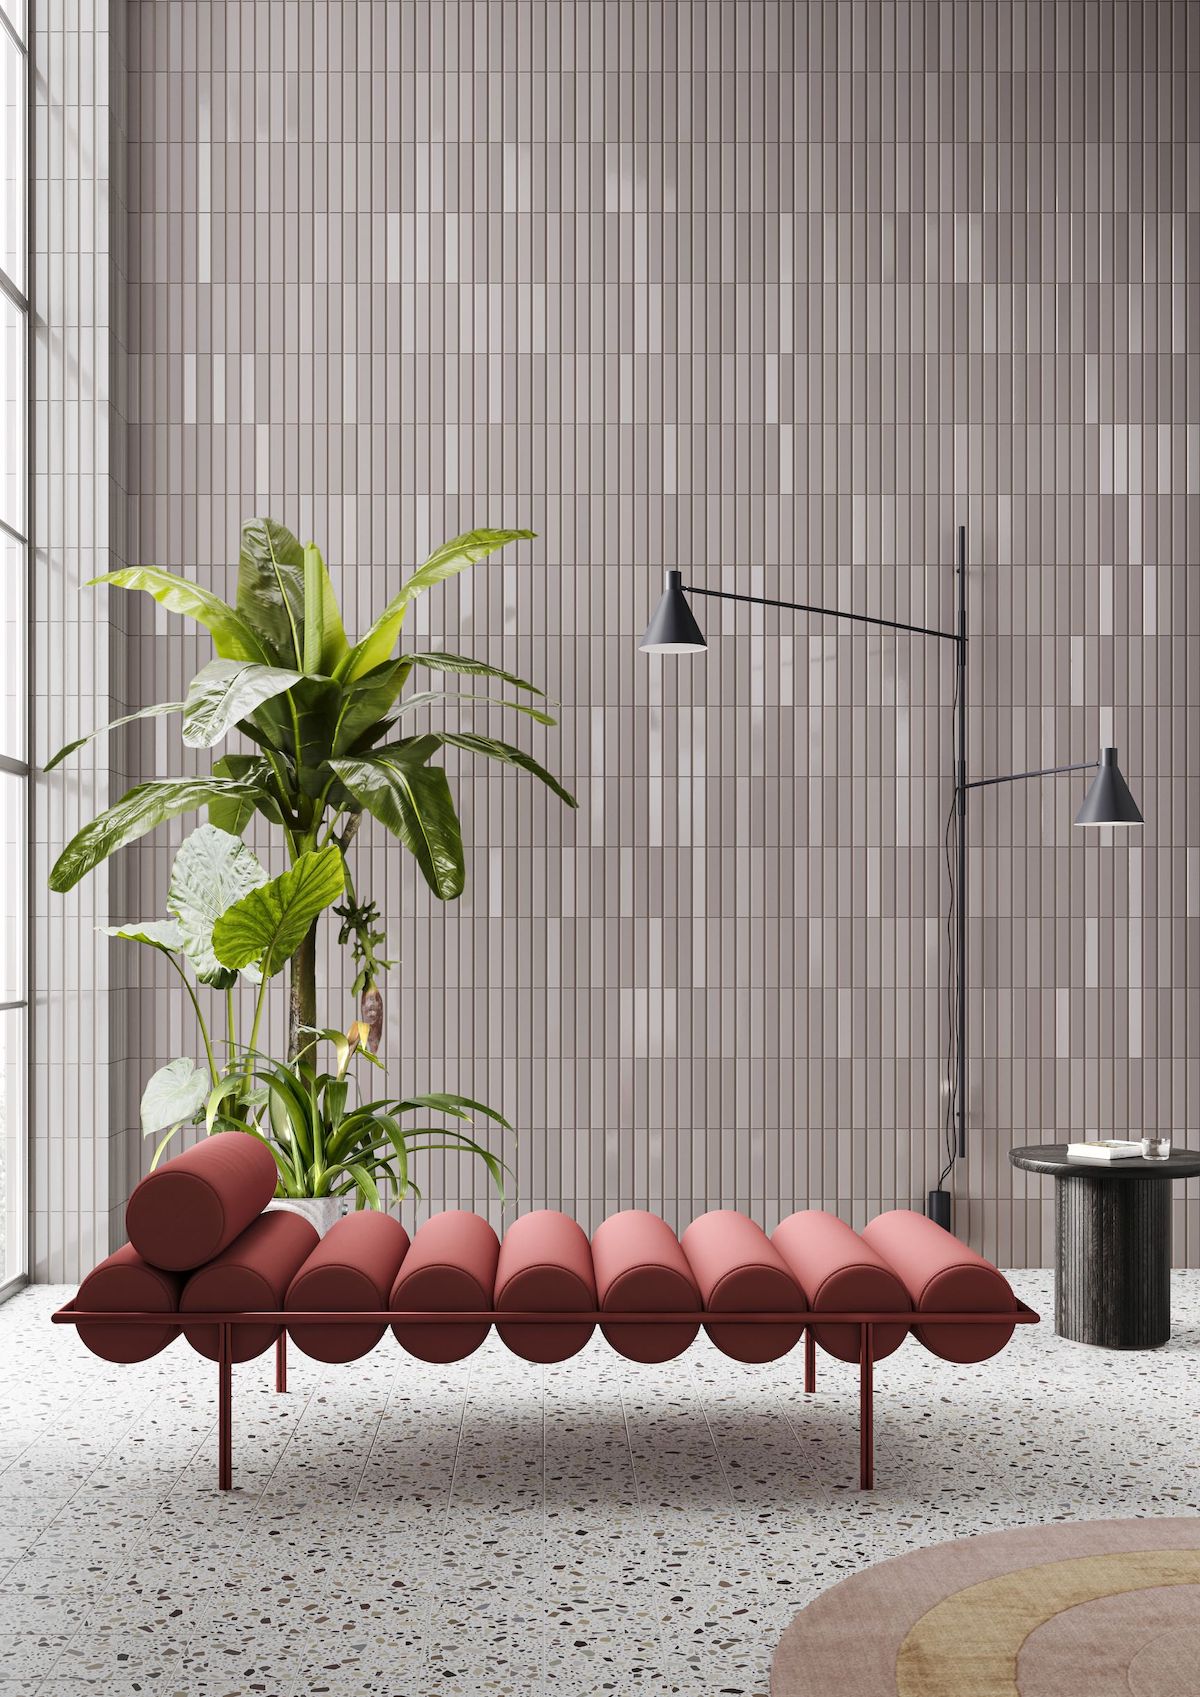 Design possibilities are now almost endless thanks to the wide selection of tiles now available